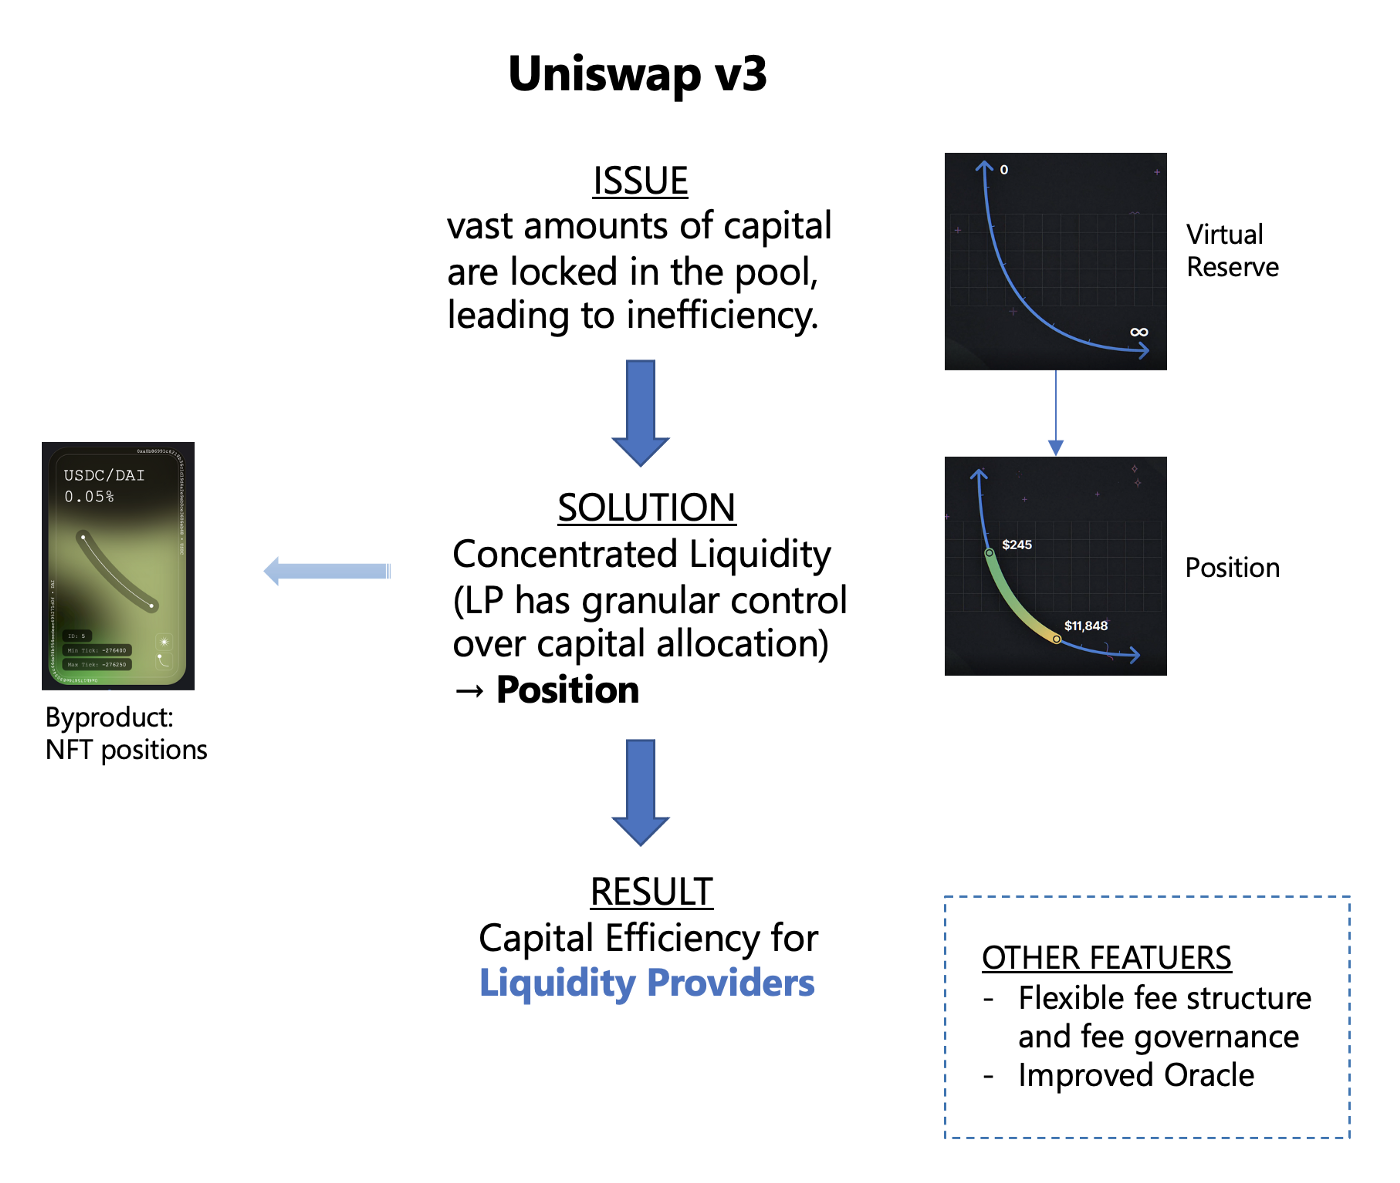 Figure 2. This diagram shows the key issue that Uniswap v3 tries to tackle, which is to increase LP’s capital efficiency.